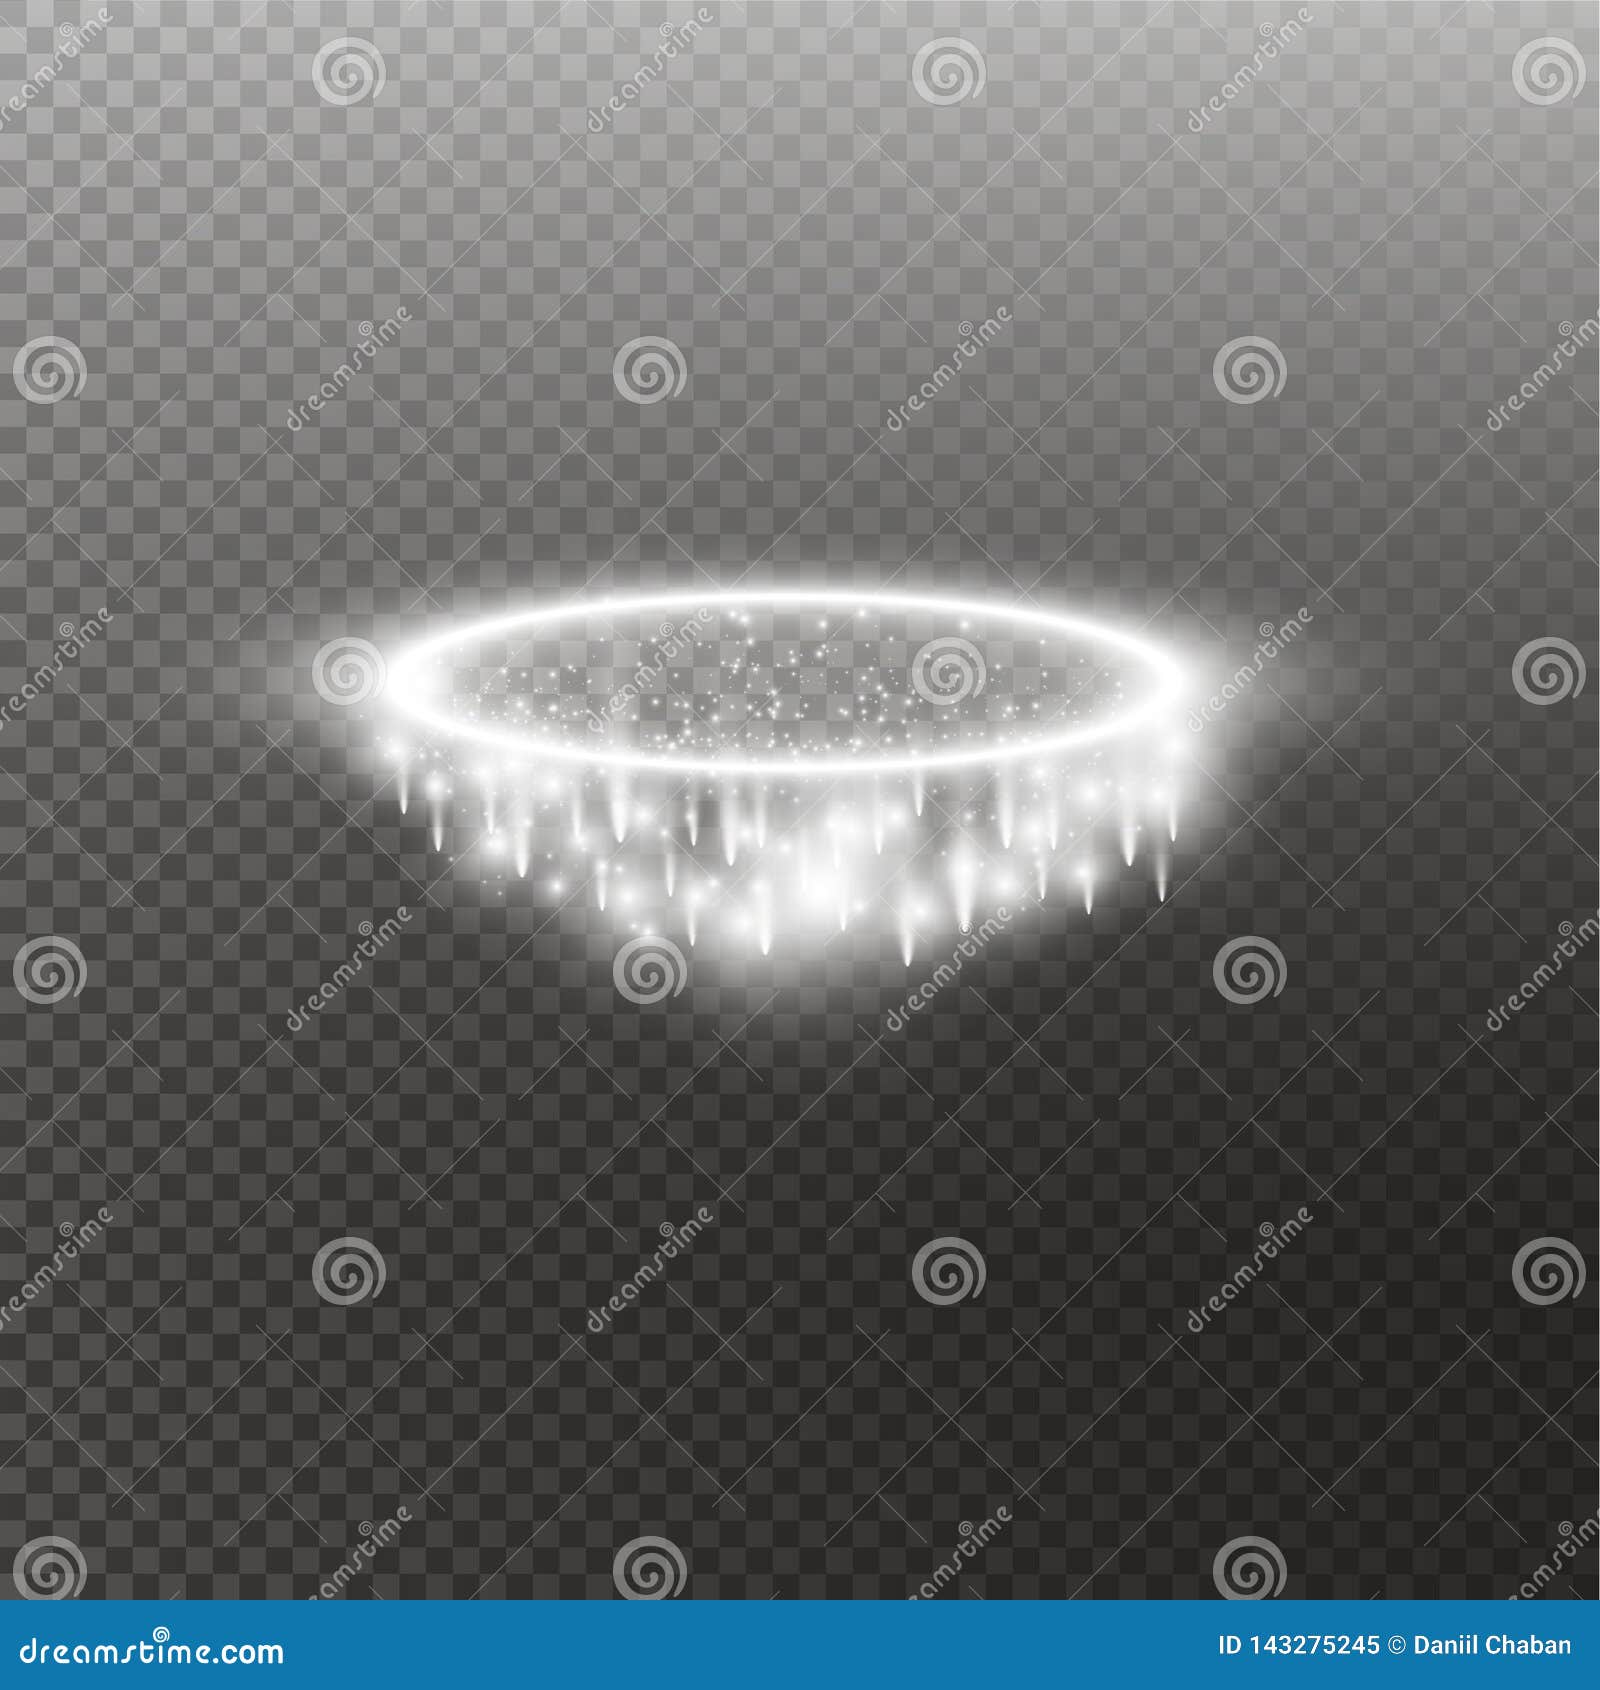 Glowing Ring Clipart Transparent Background, Blue Glowing Ring Free Button,  Cartoon Blue, Glowing, Bright Ring Download PNG Image For Free Download